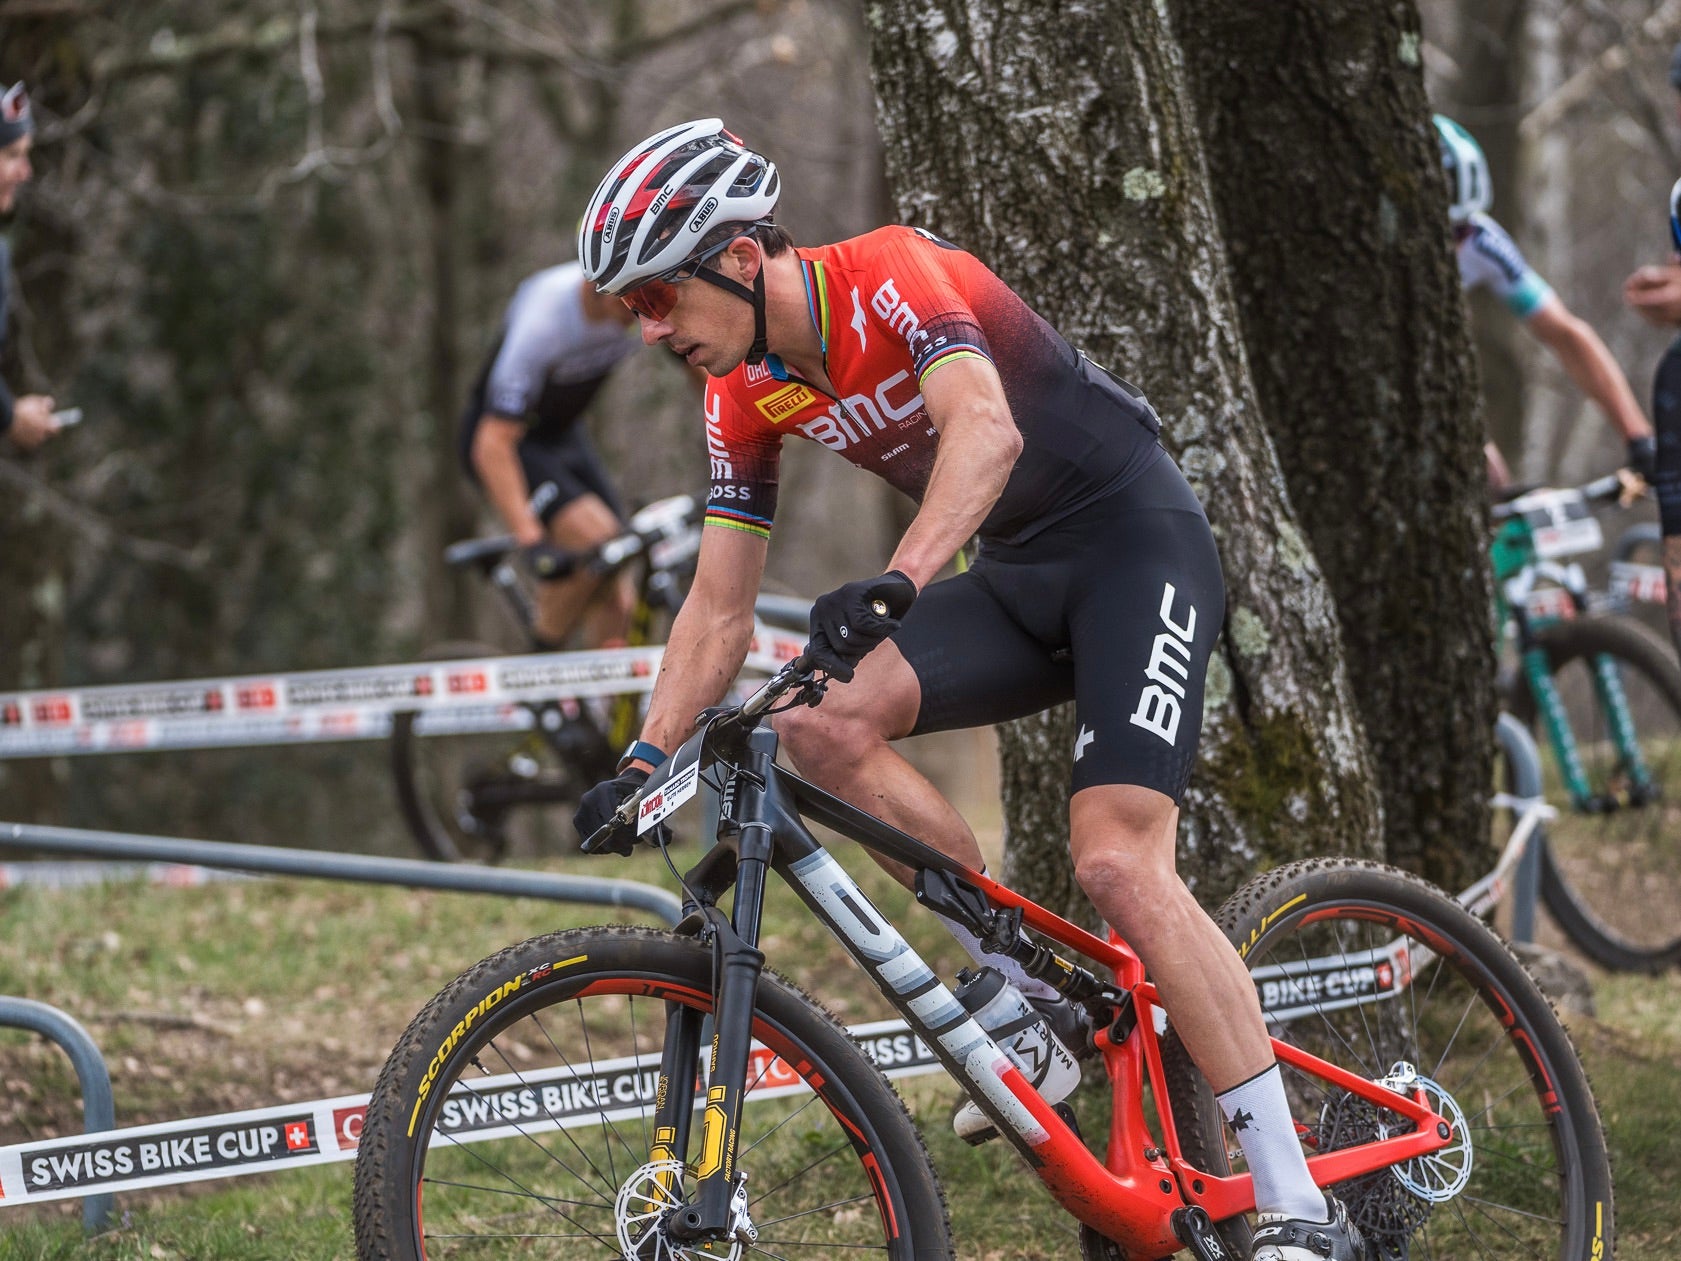 World Cup season opens in Brazil: multilayered importance for Team BMC athletes